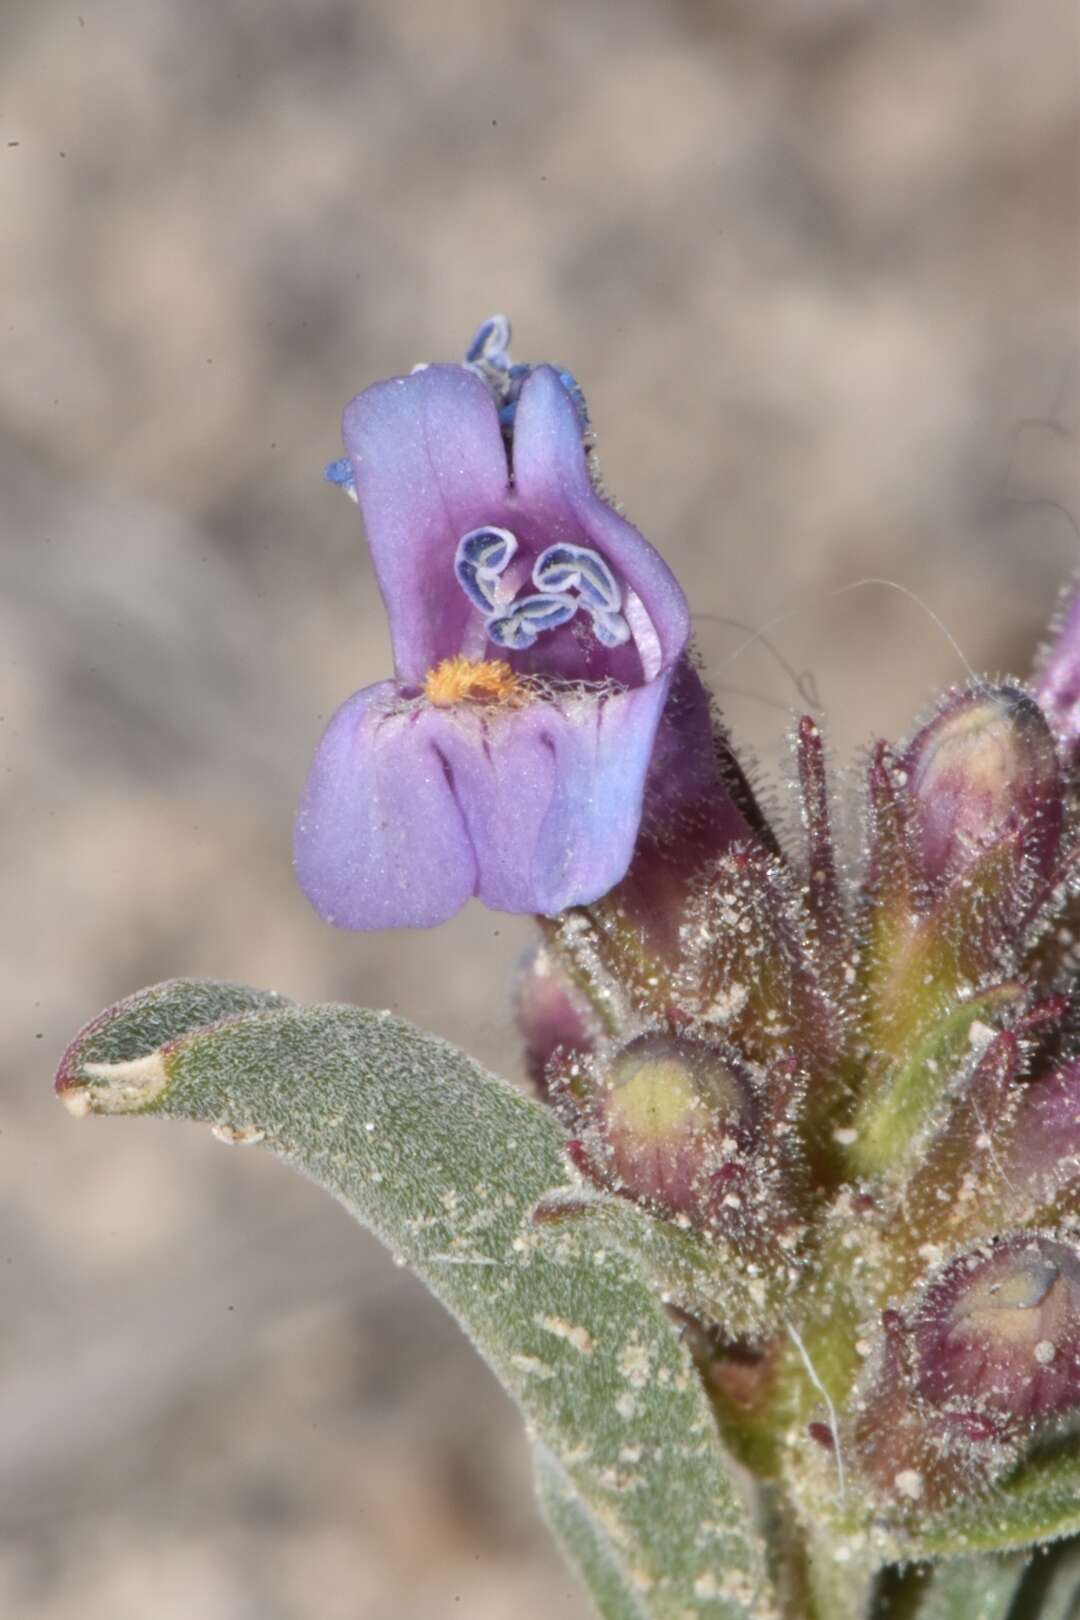 Image of White River Valley beardtongue